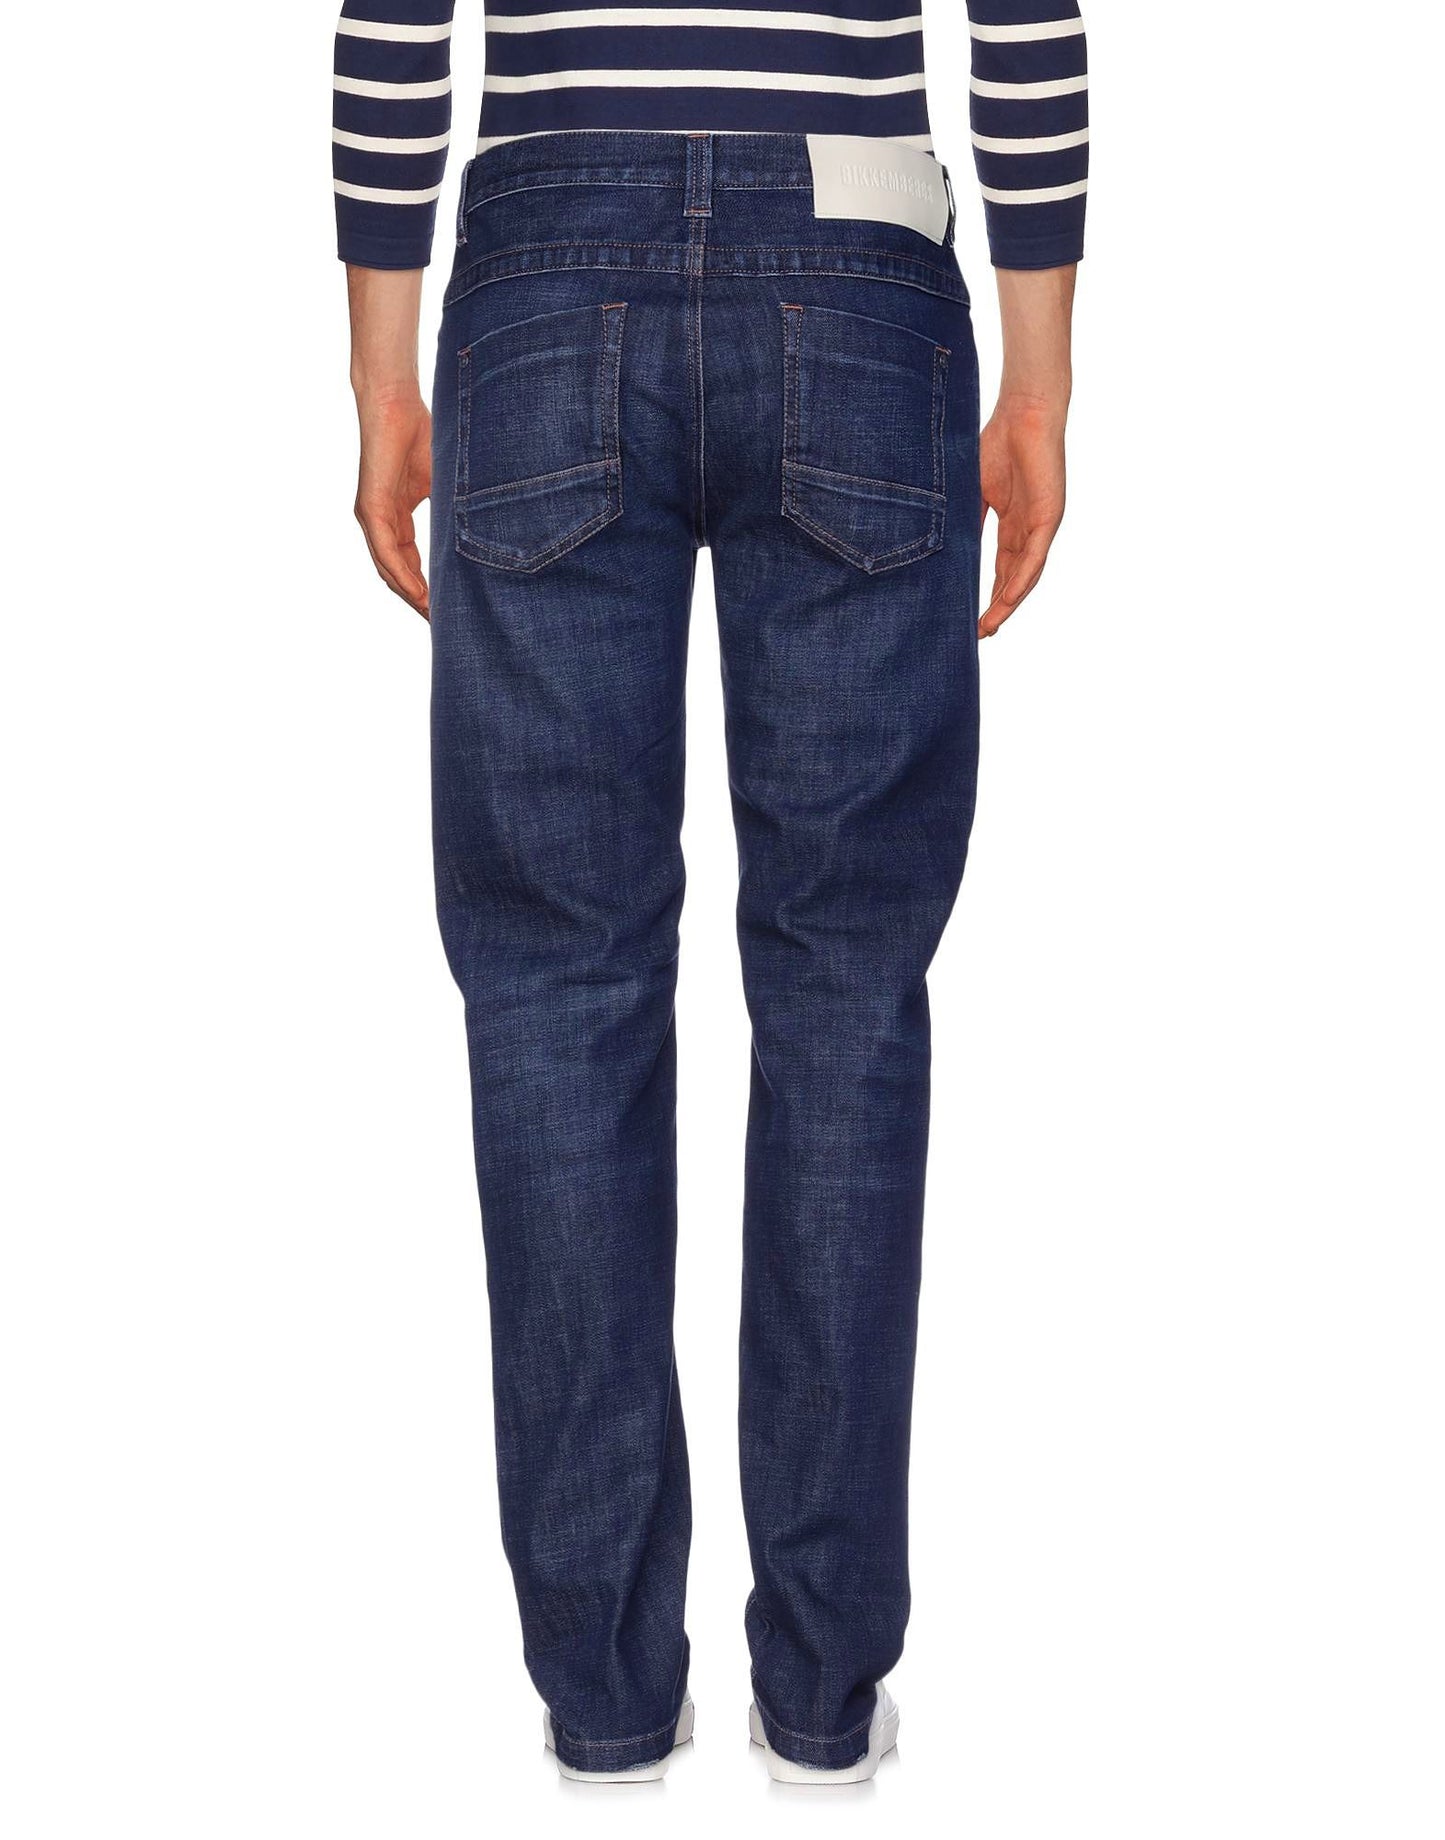 Dark Blue Men's Regular Fit Jeans - Designed by Bikkembergs Available to Buy at a Discounted Price on Moon Behind The Hill Online Designer Discount Store